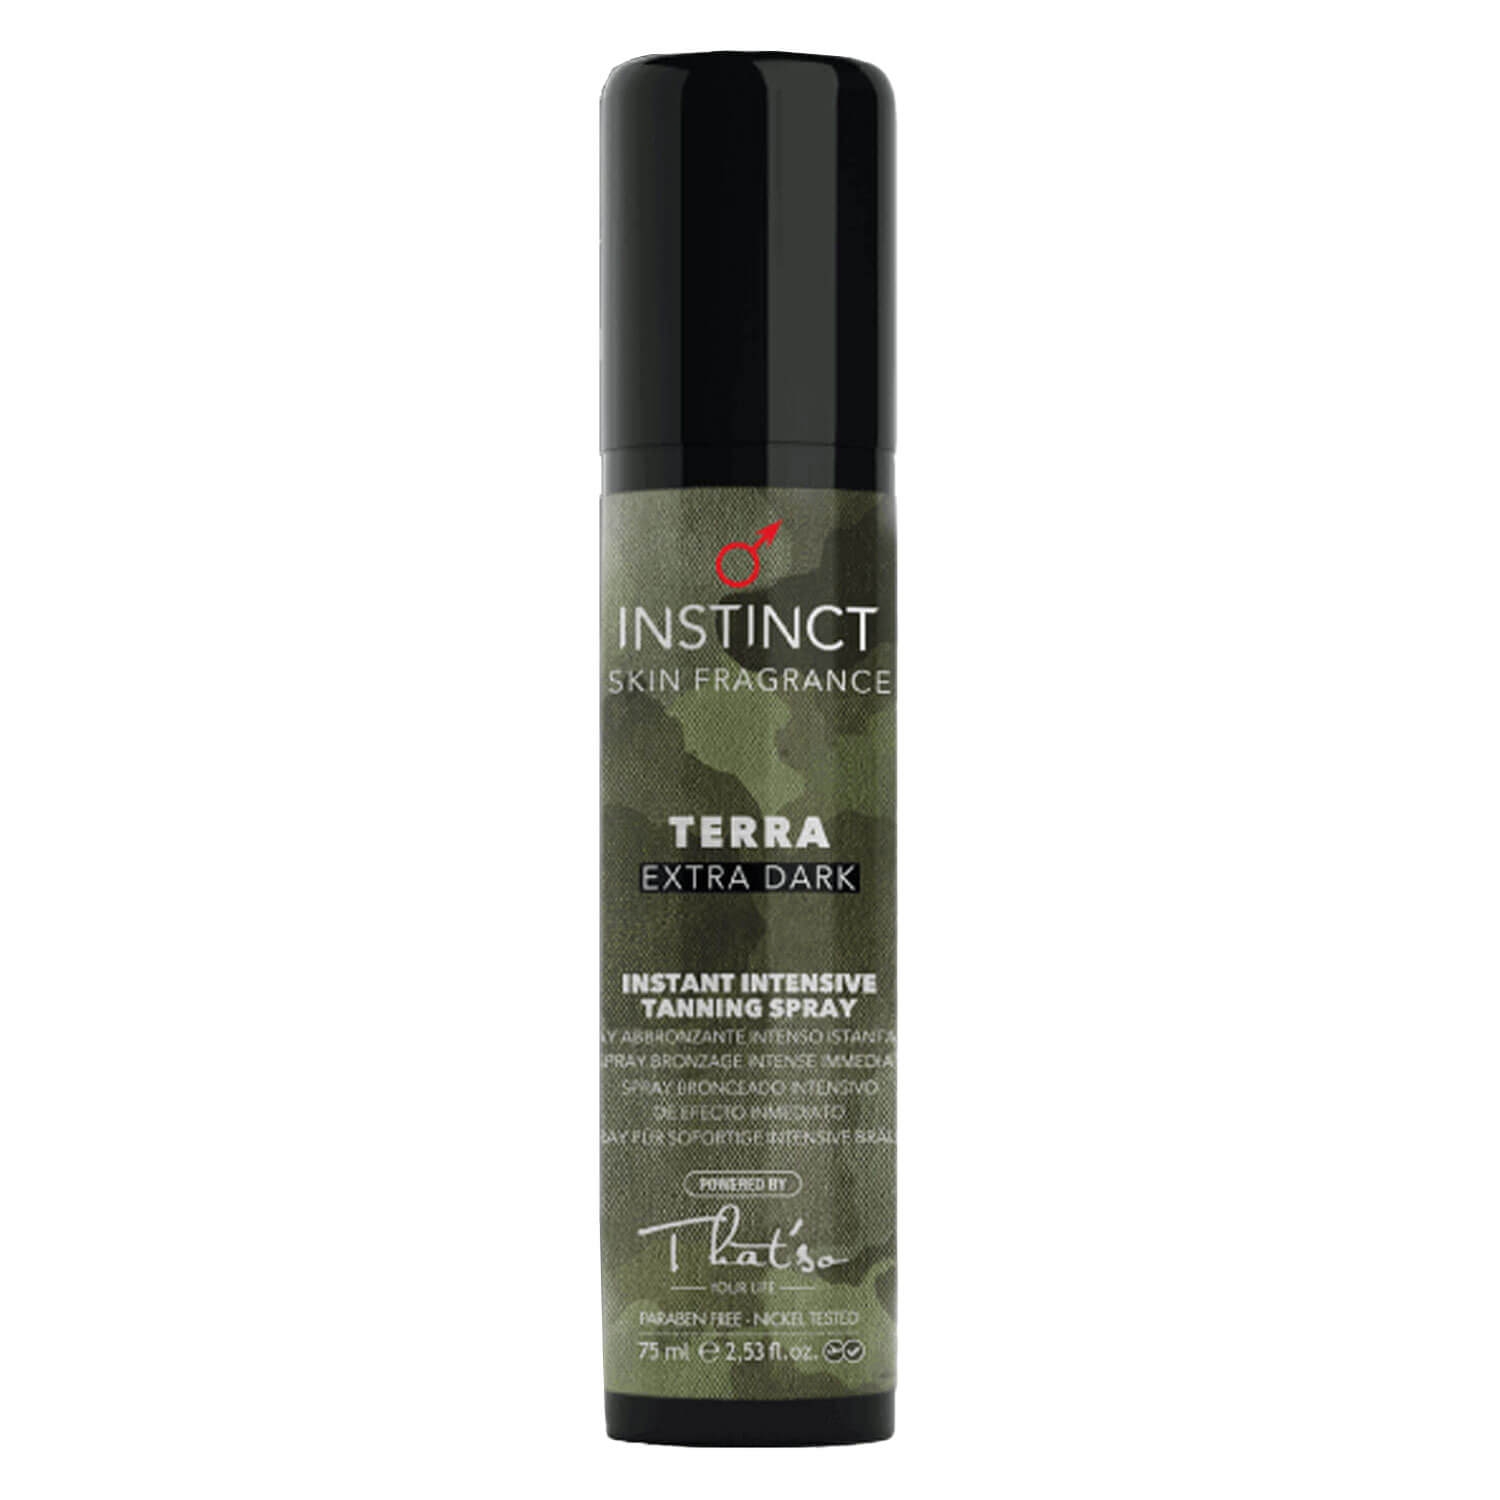 Product image from That'so - INSTINCT SKIN FRAGRANCE TERRA EXTRA DARK